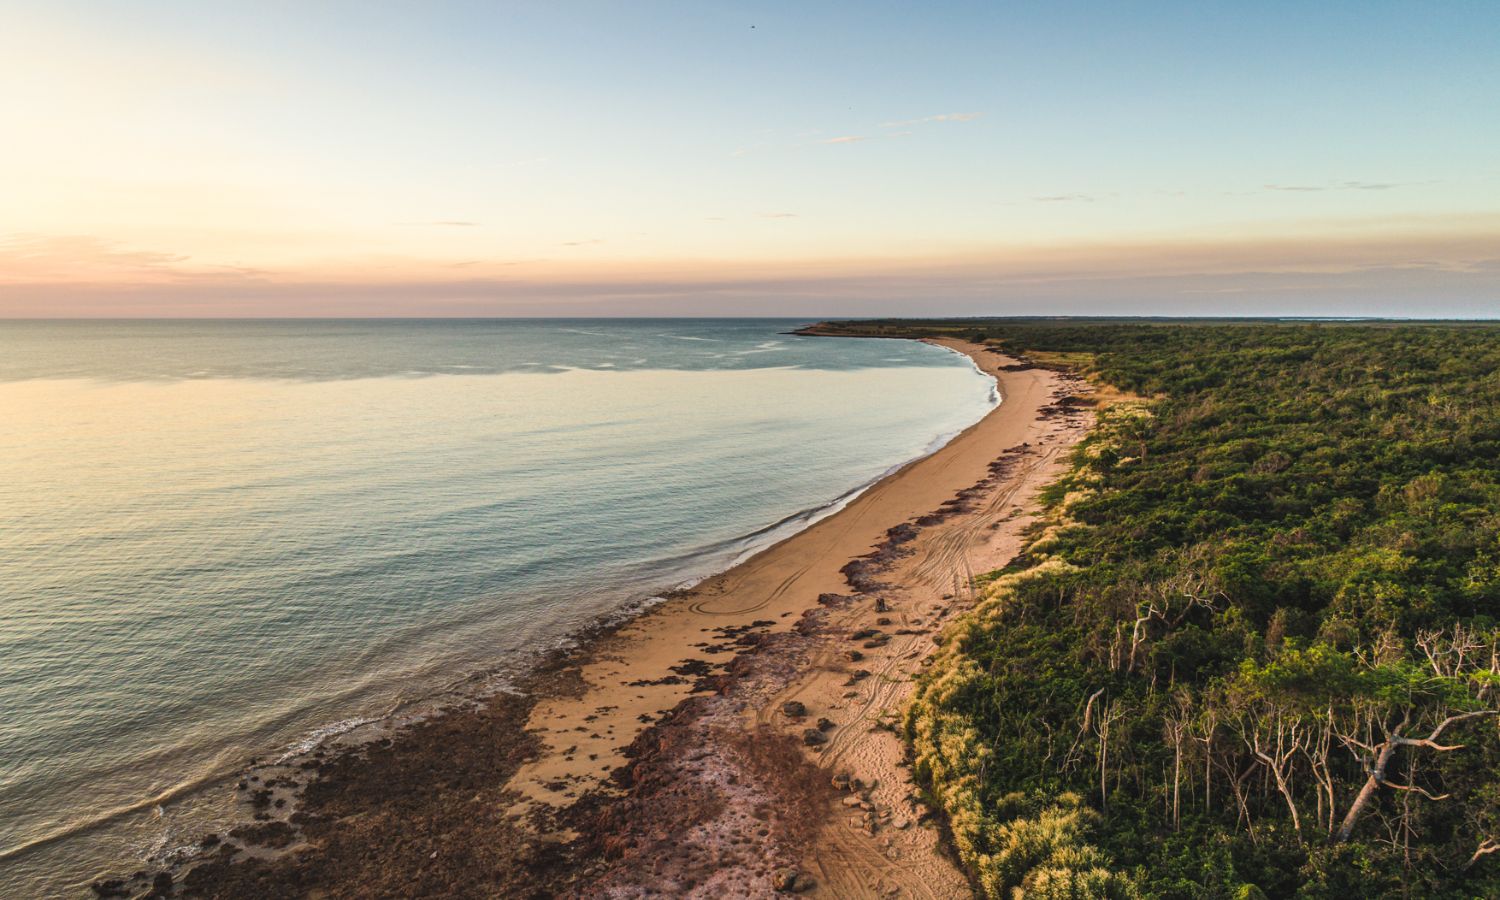 An image of one of the best beaches in the northern territory